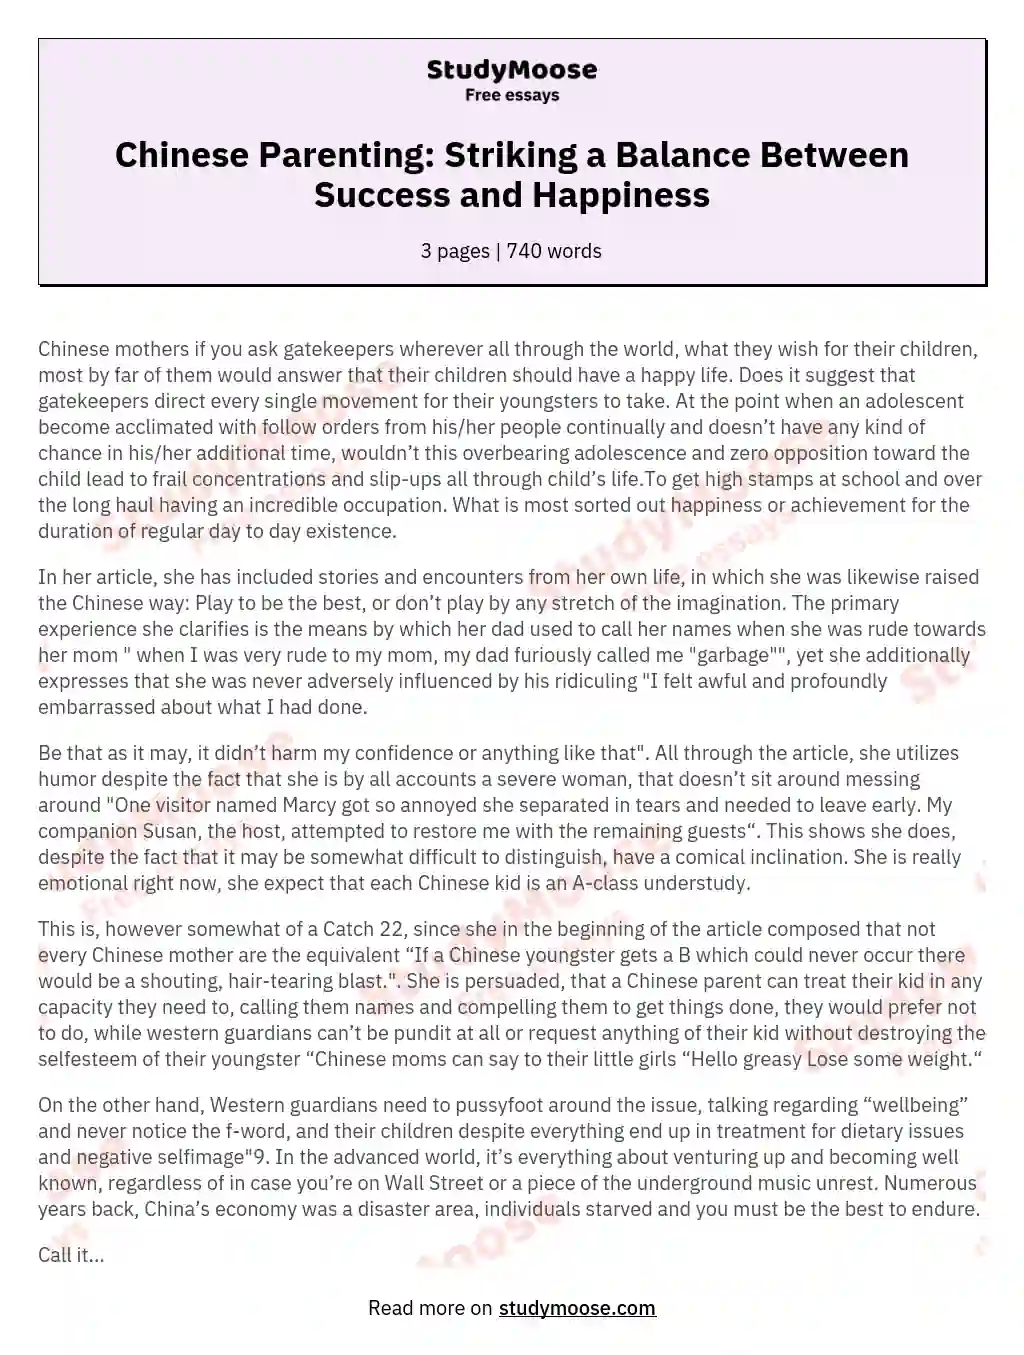 Chinese Parenting: Striking a Balance Between Success and Happiness essay